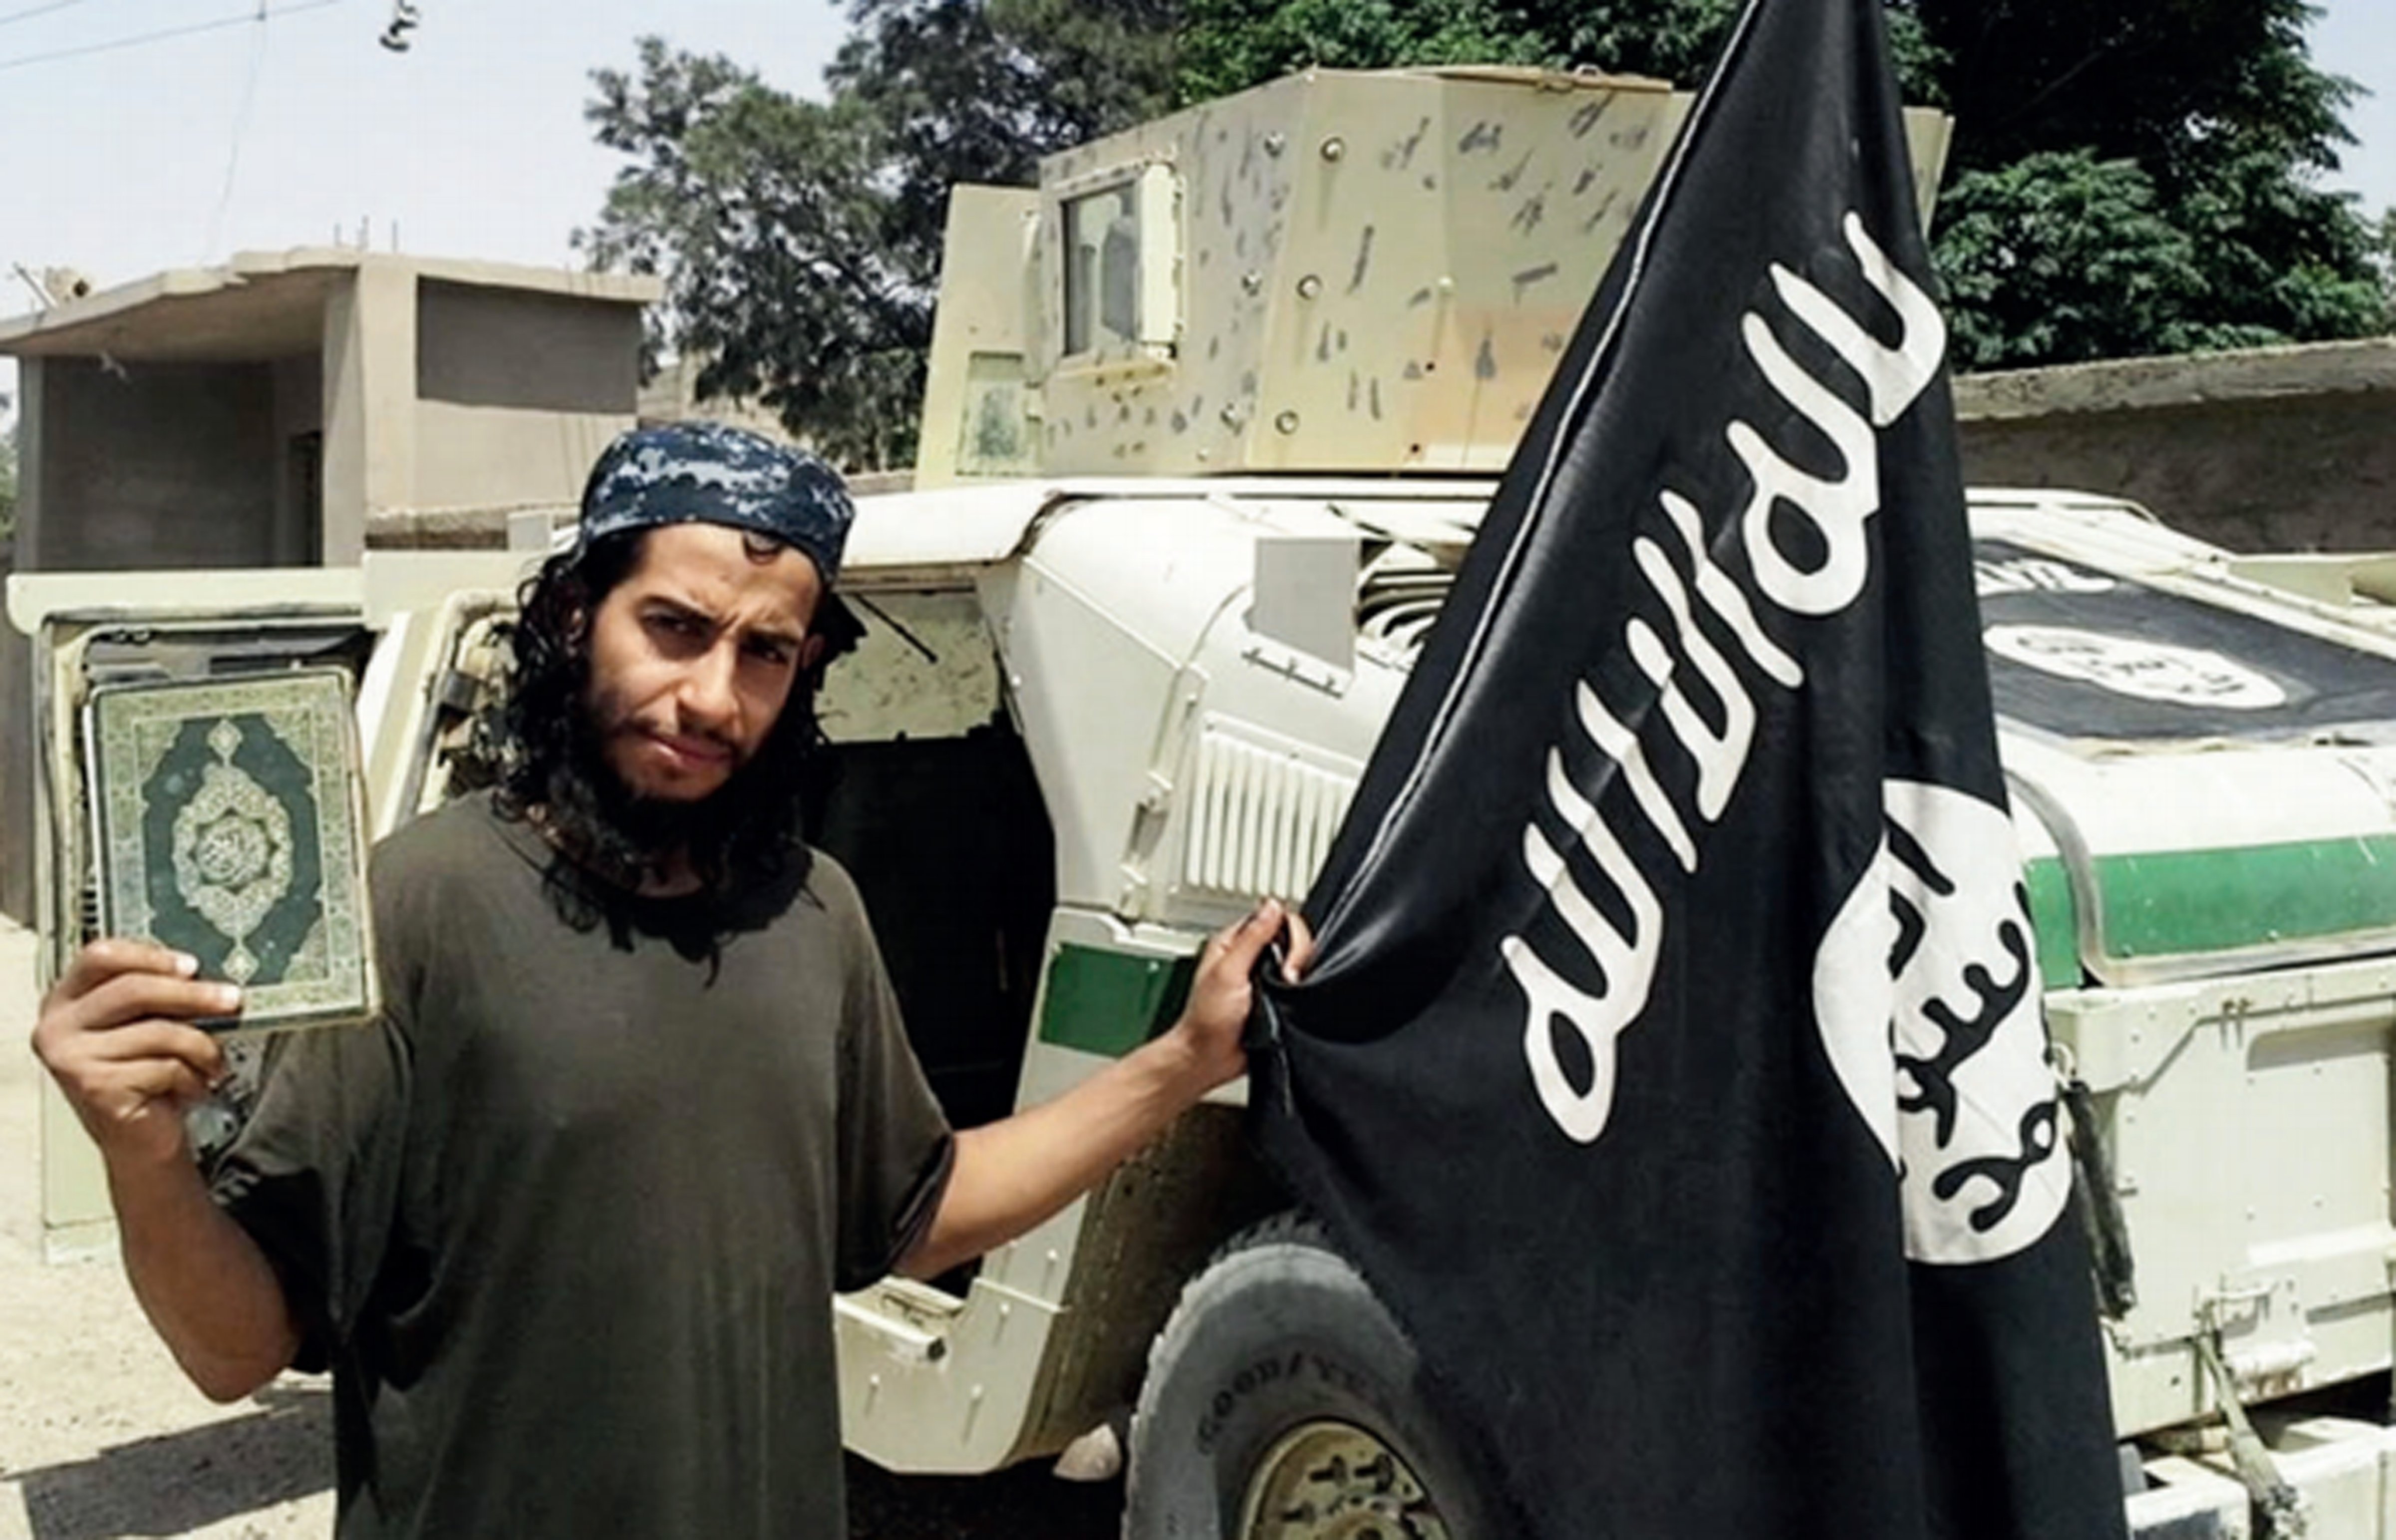 An undated image, which was obtained by the Associated Press from Islamic State's English-language magazine Dabiq, shows Abdelhamid Abaaoud. (Militant Publication via AP)